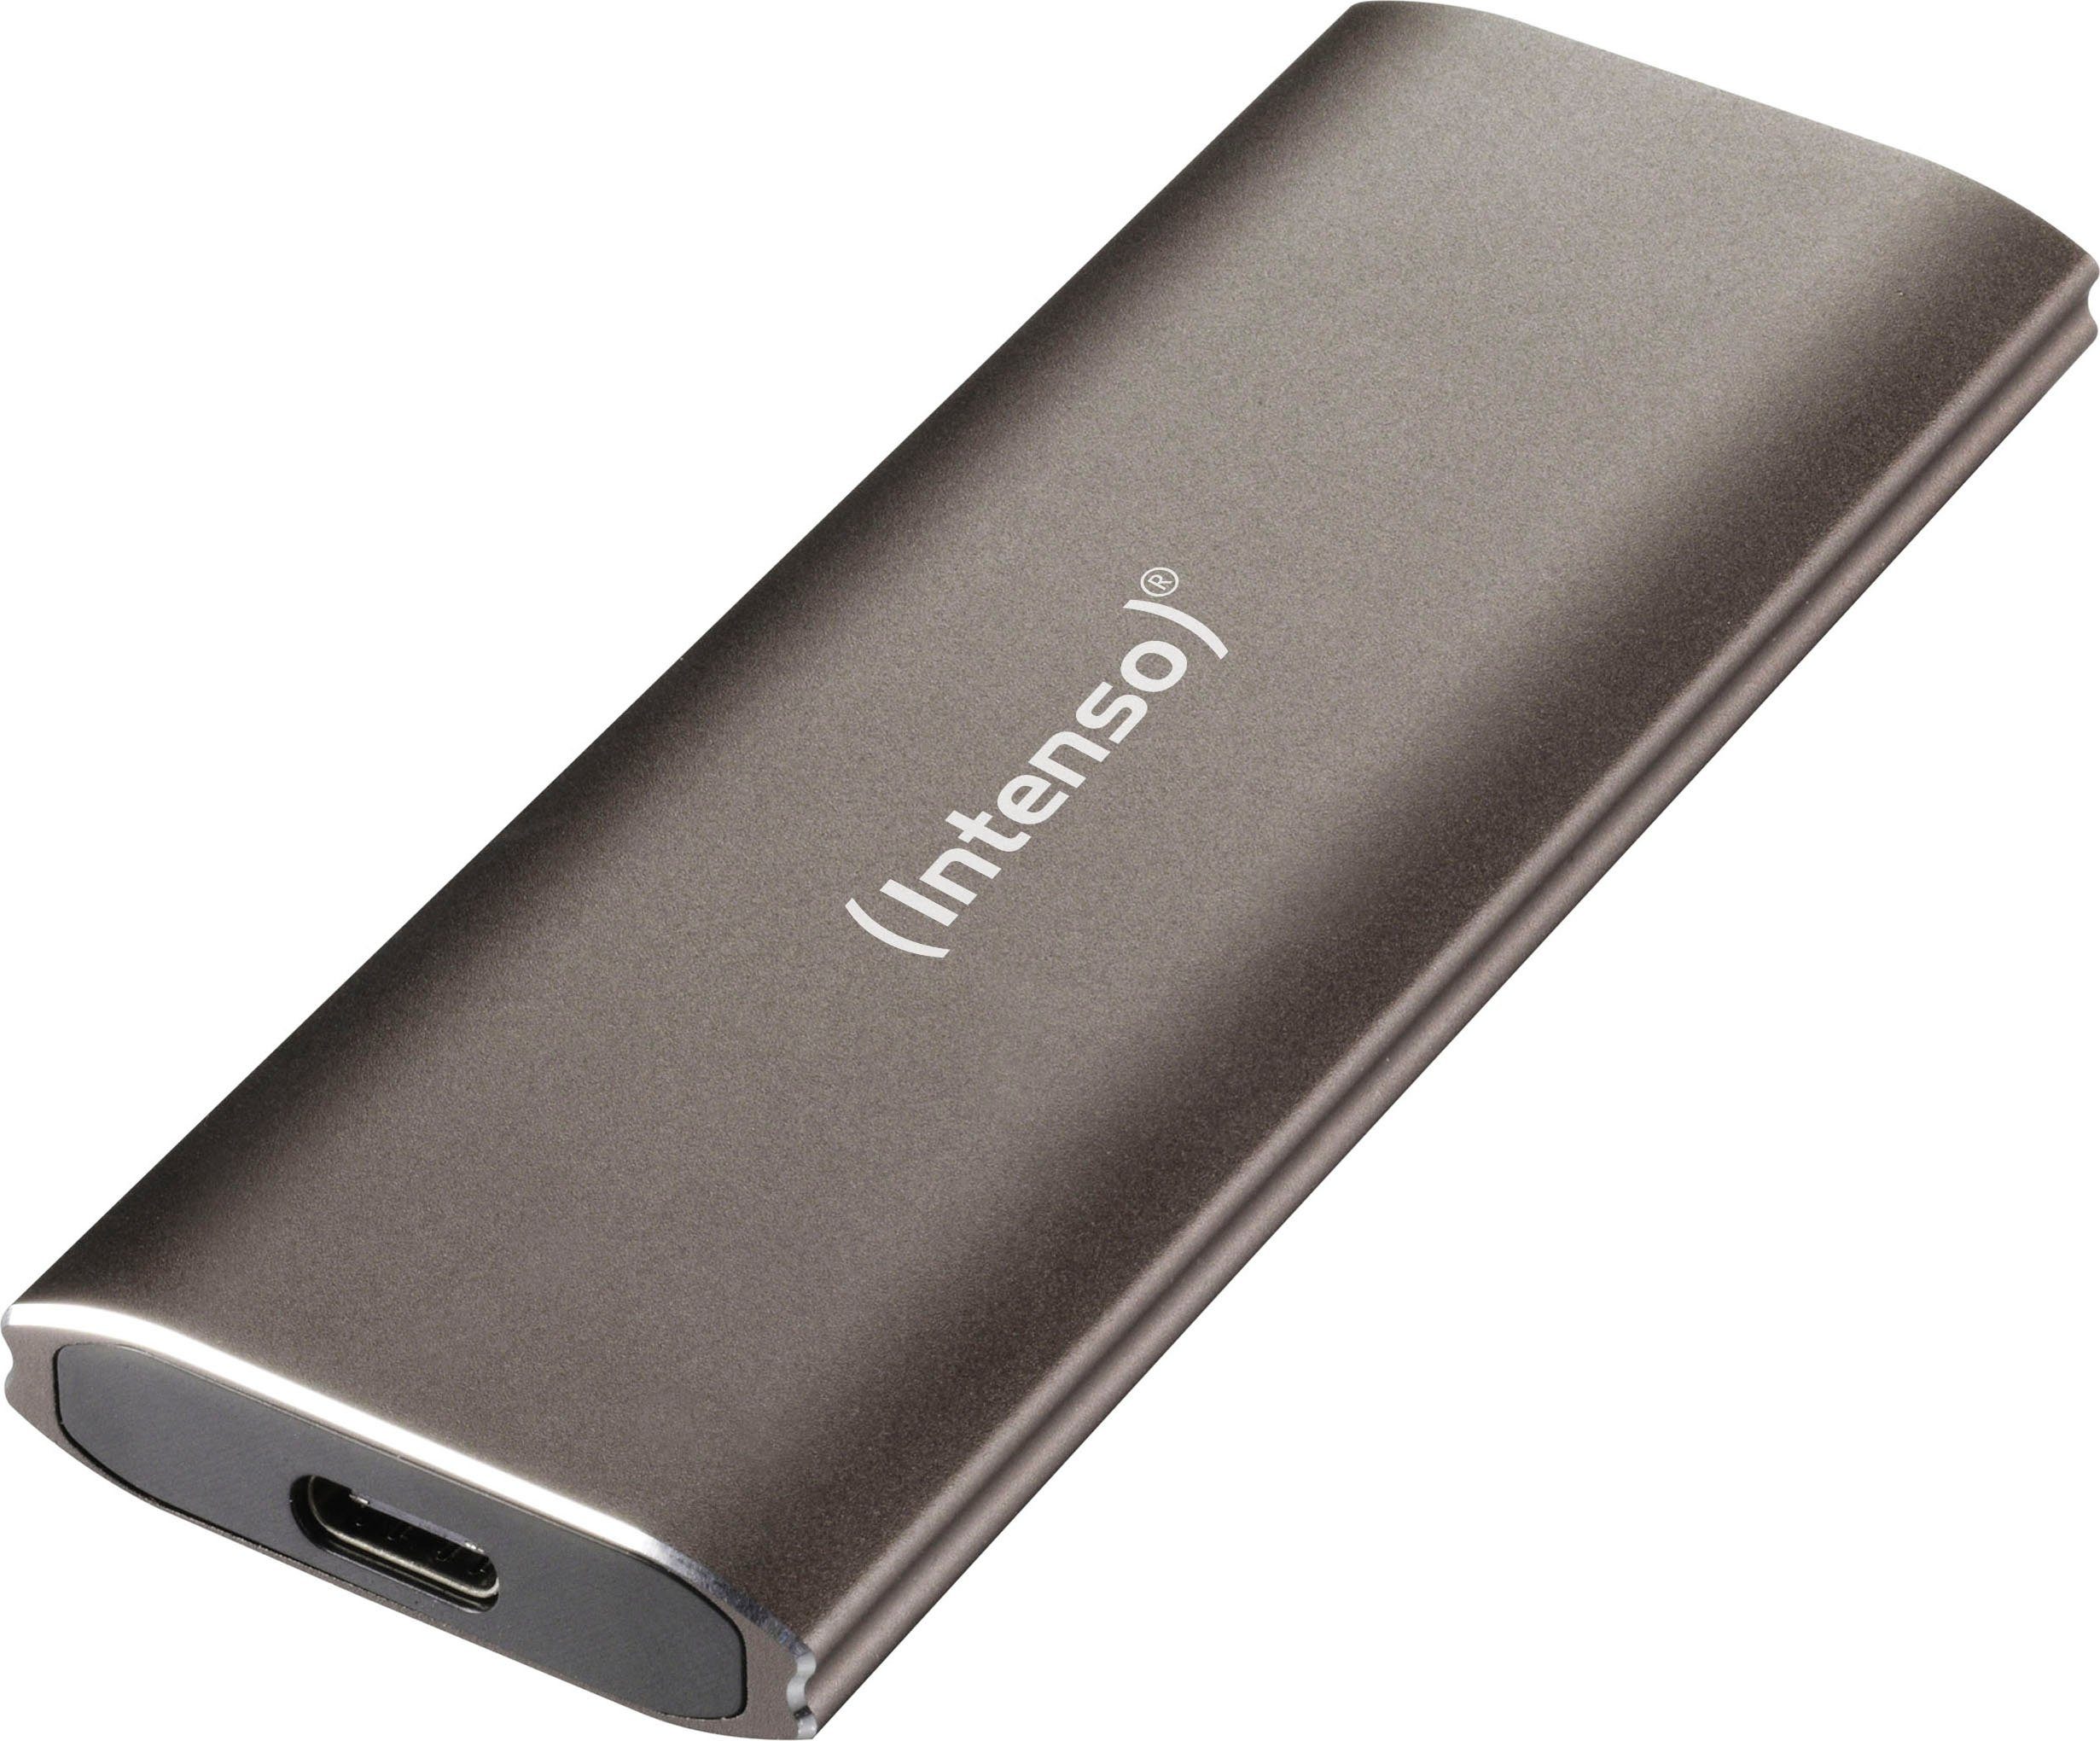 Intenso Professional externe SSD (250 GB) 1,8" 800 MB/S Lesegeschwindigkeit